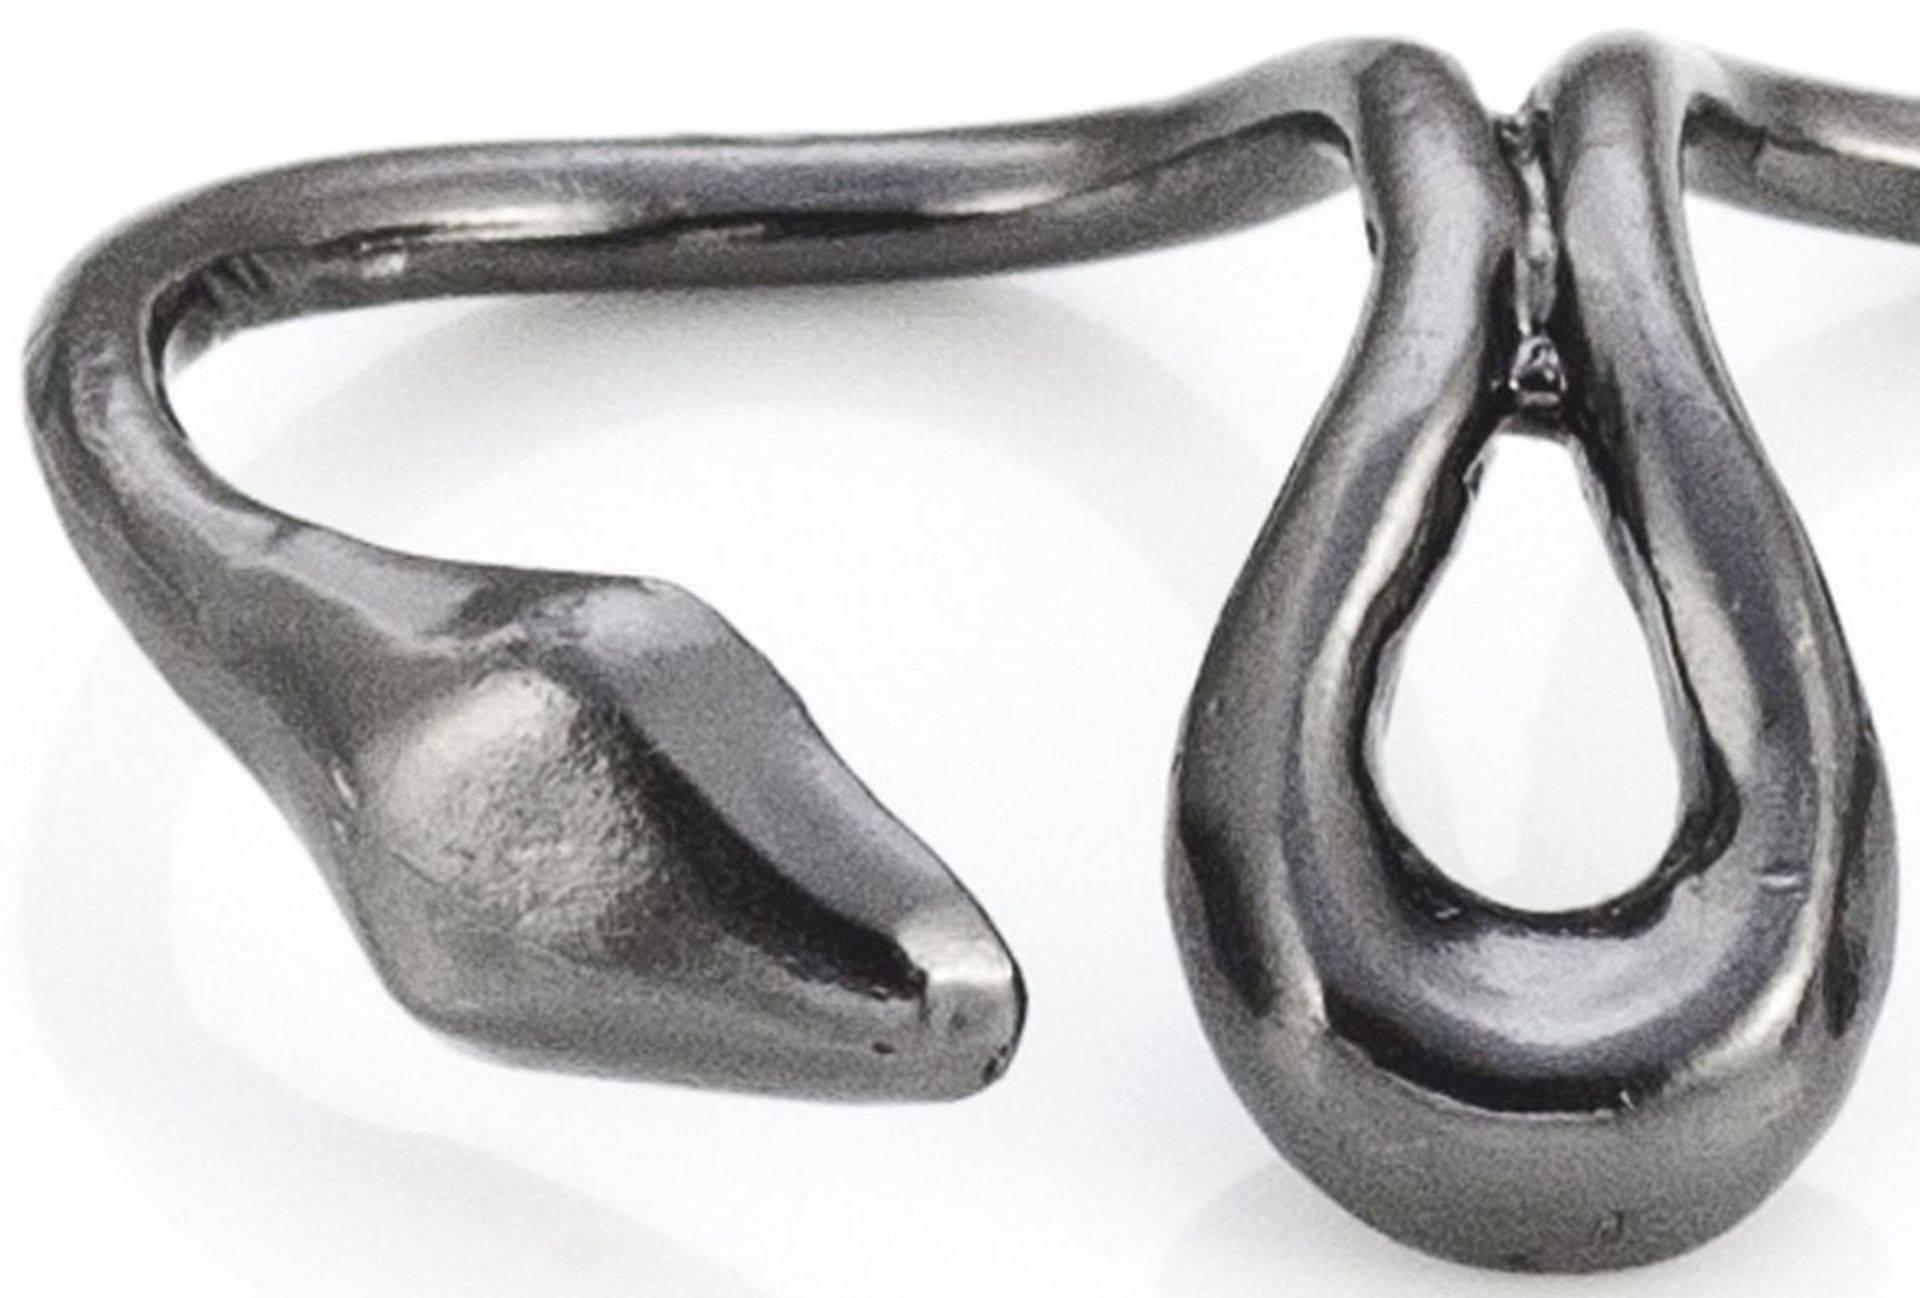 Giulia Barela's Ribbon ring

A snake gets comfortable between a few fingers, hold on tight creating a bond of strength.

Material: 925 silver, black rhodium
